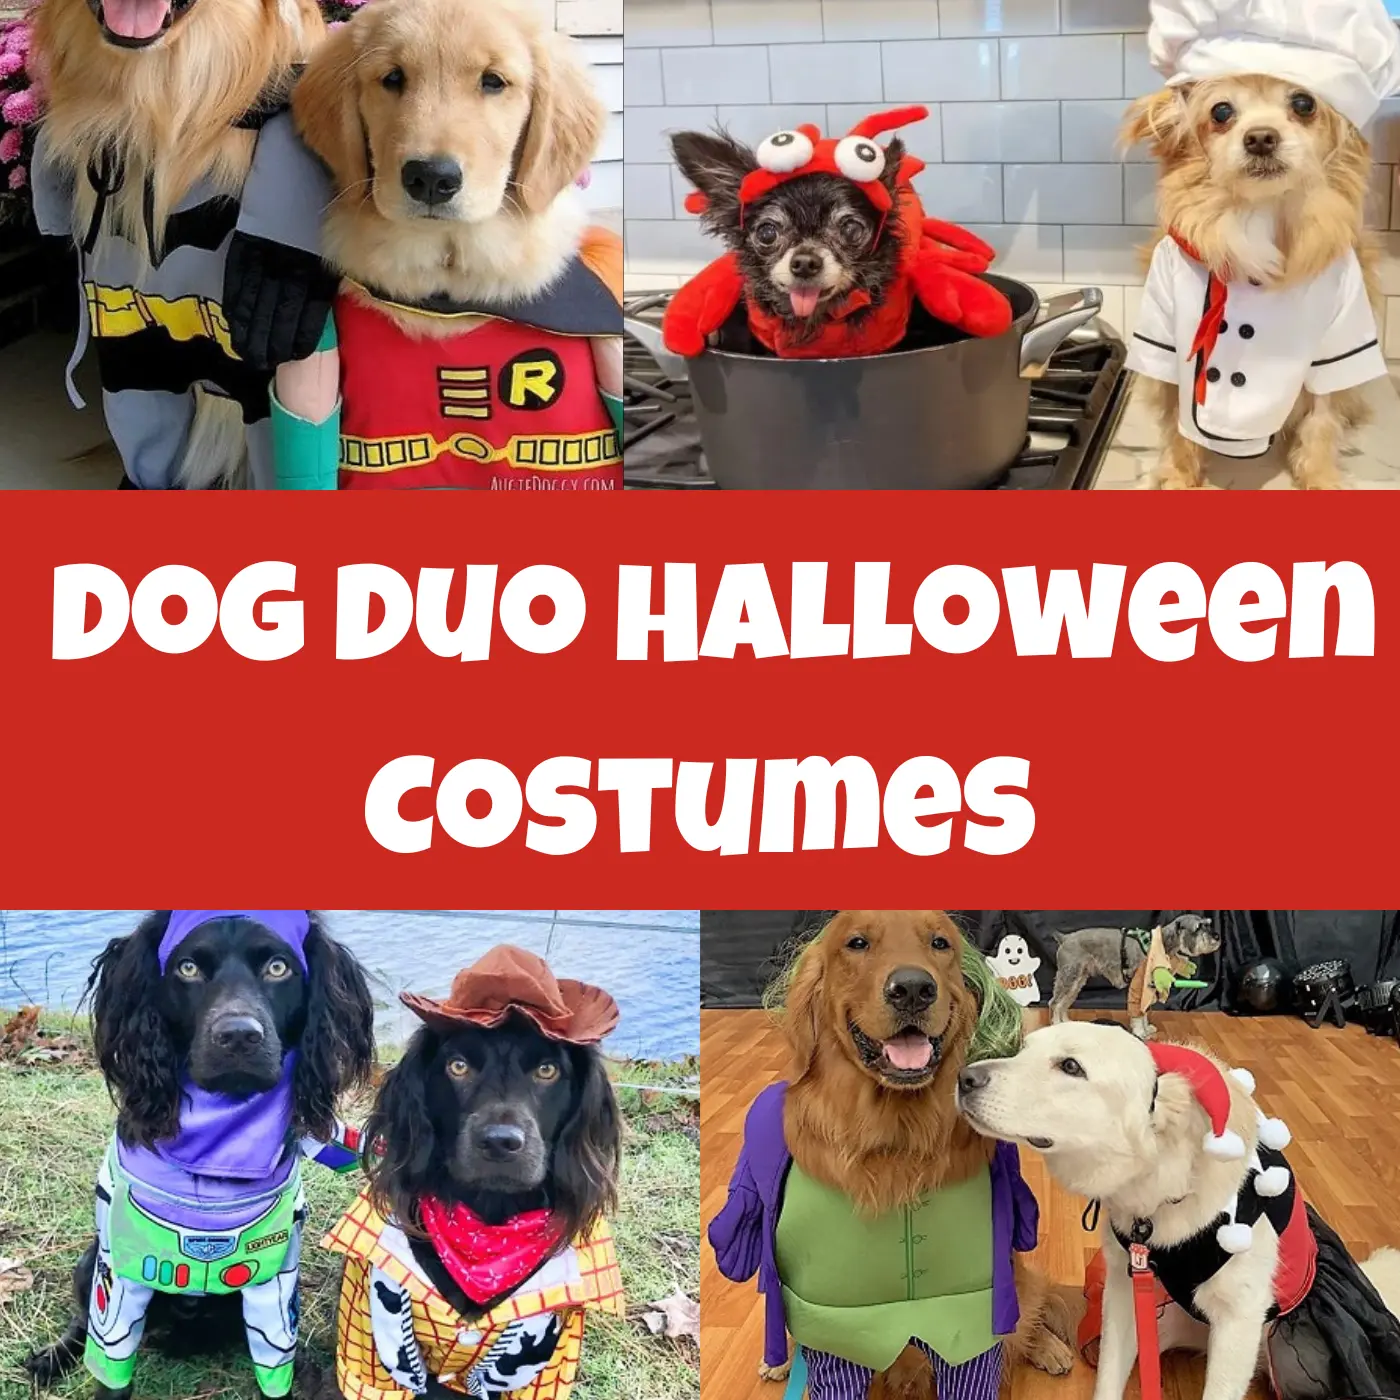 Dog duo Halloween costumes by A Plus Costumes